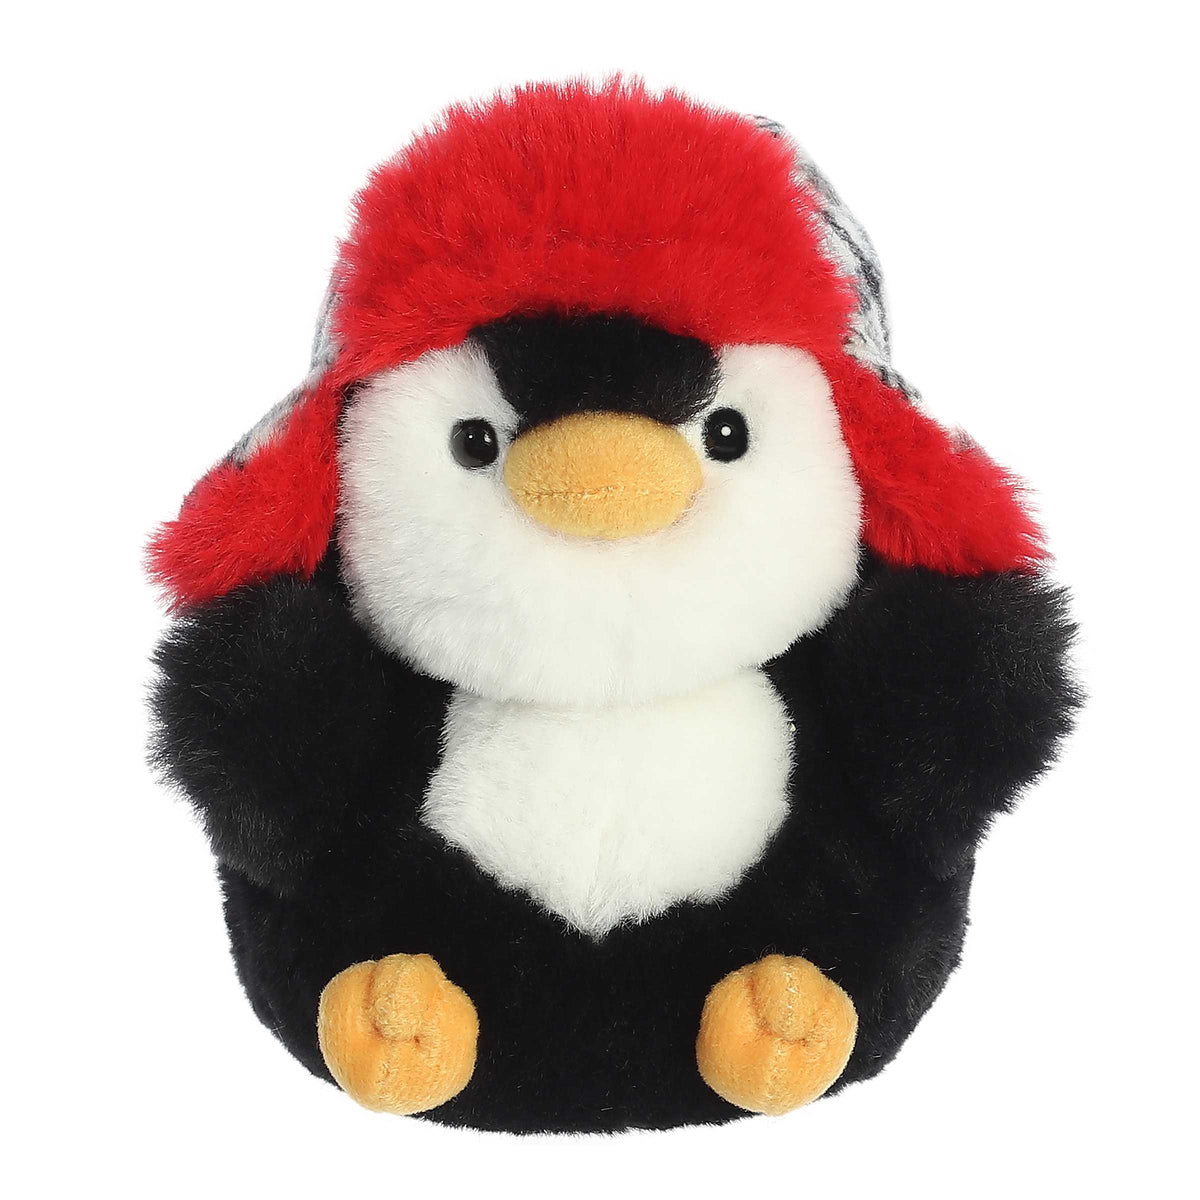 Adorable black penguin with yellow accents on the beak and stubby feet wearing a red and plaid hunters hat